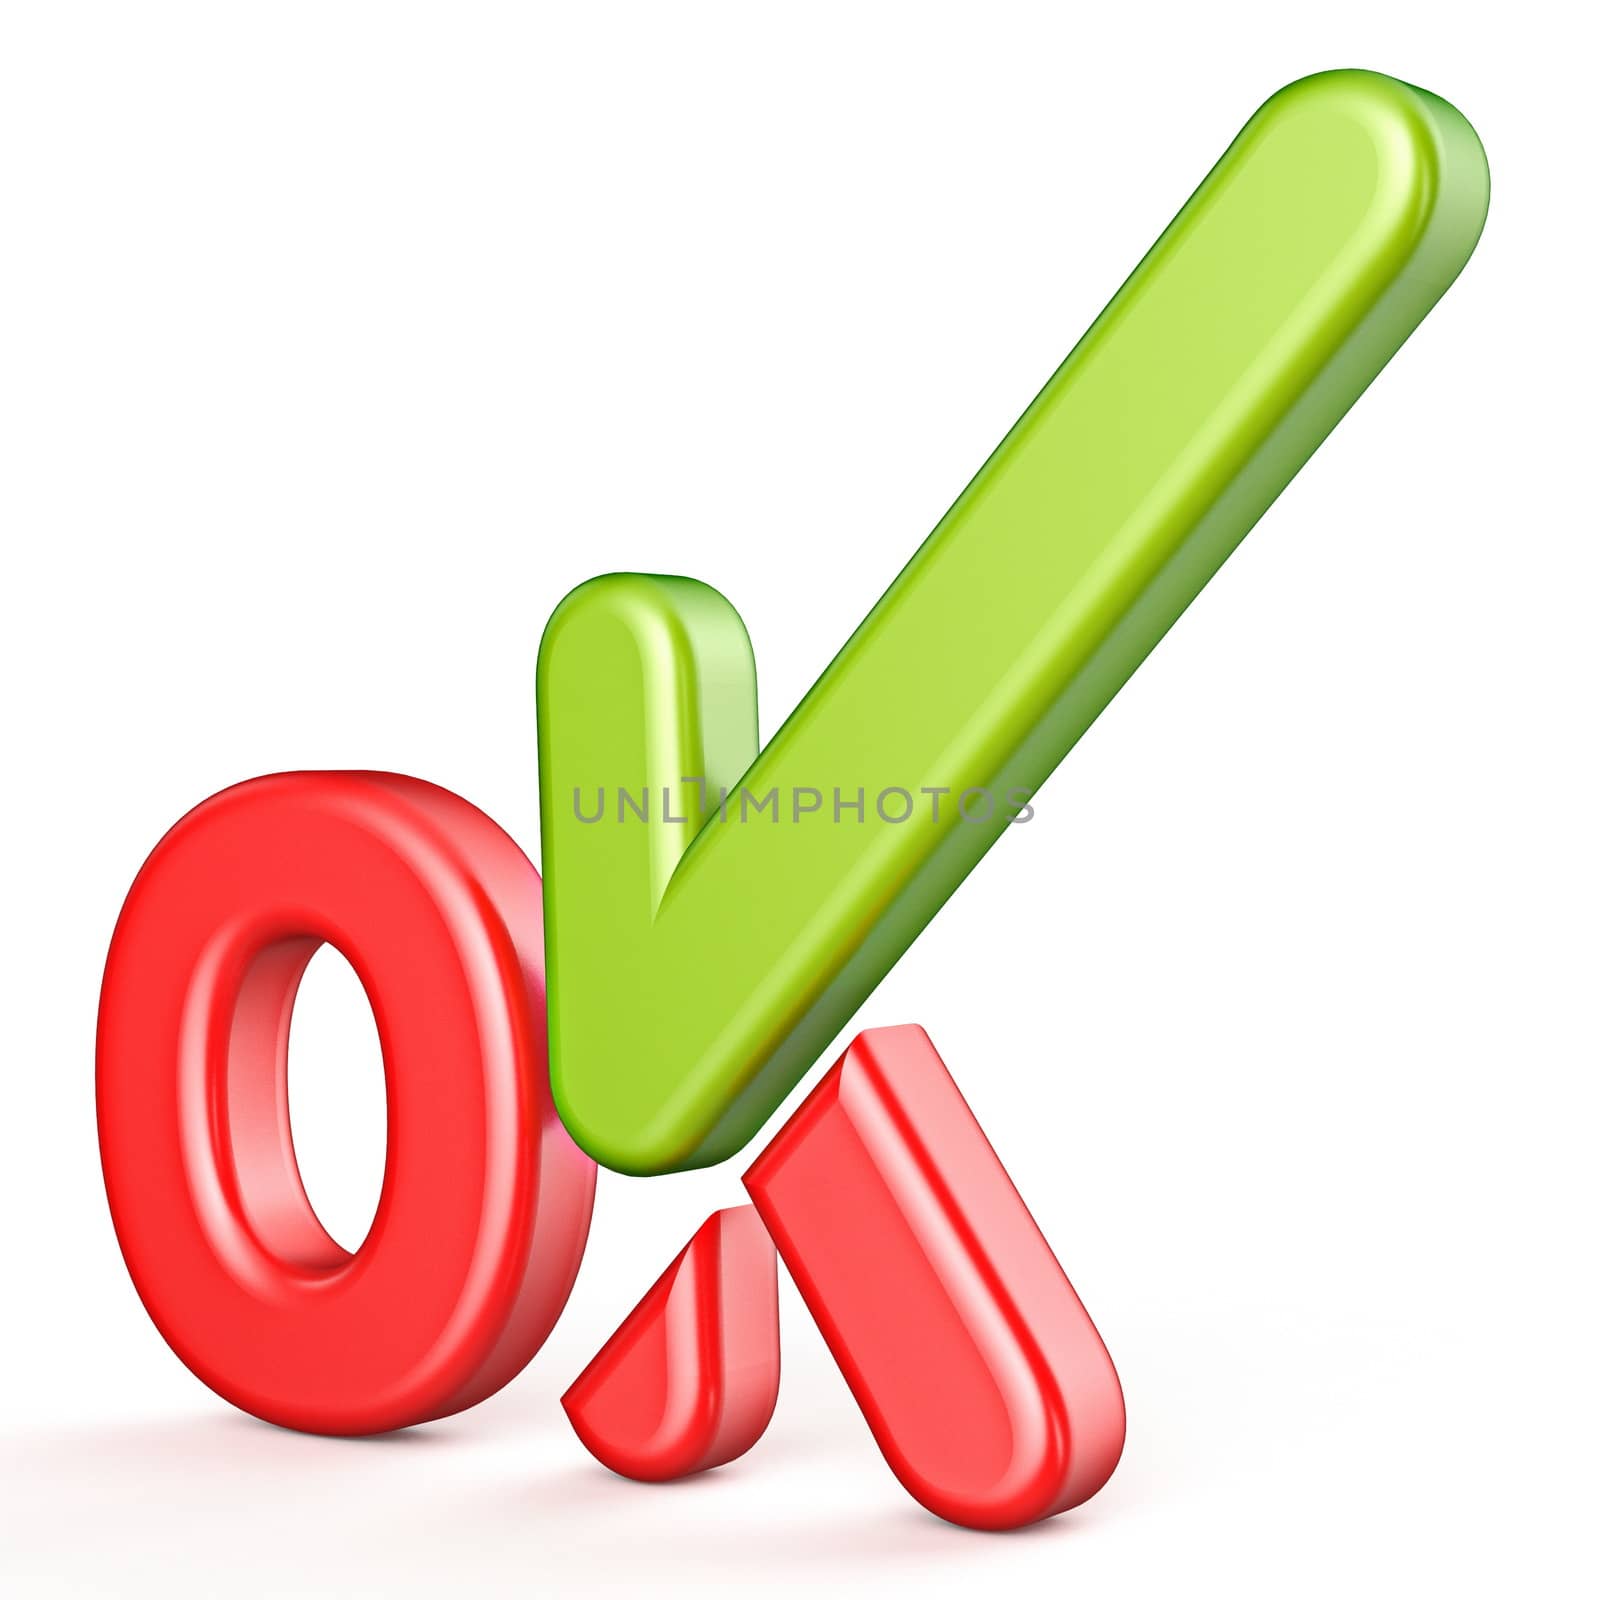 Word OK with green check mark Side view 3D render illustration isolated on white background